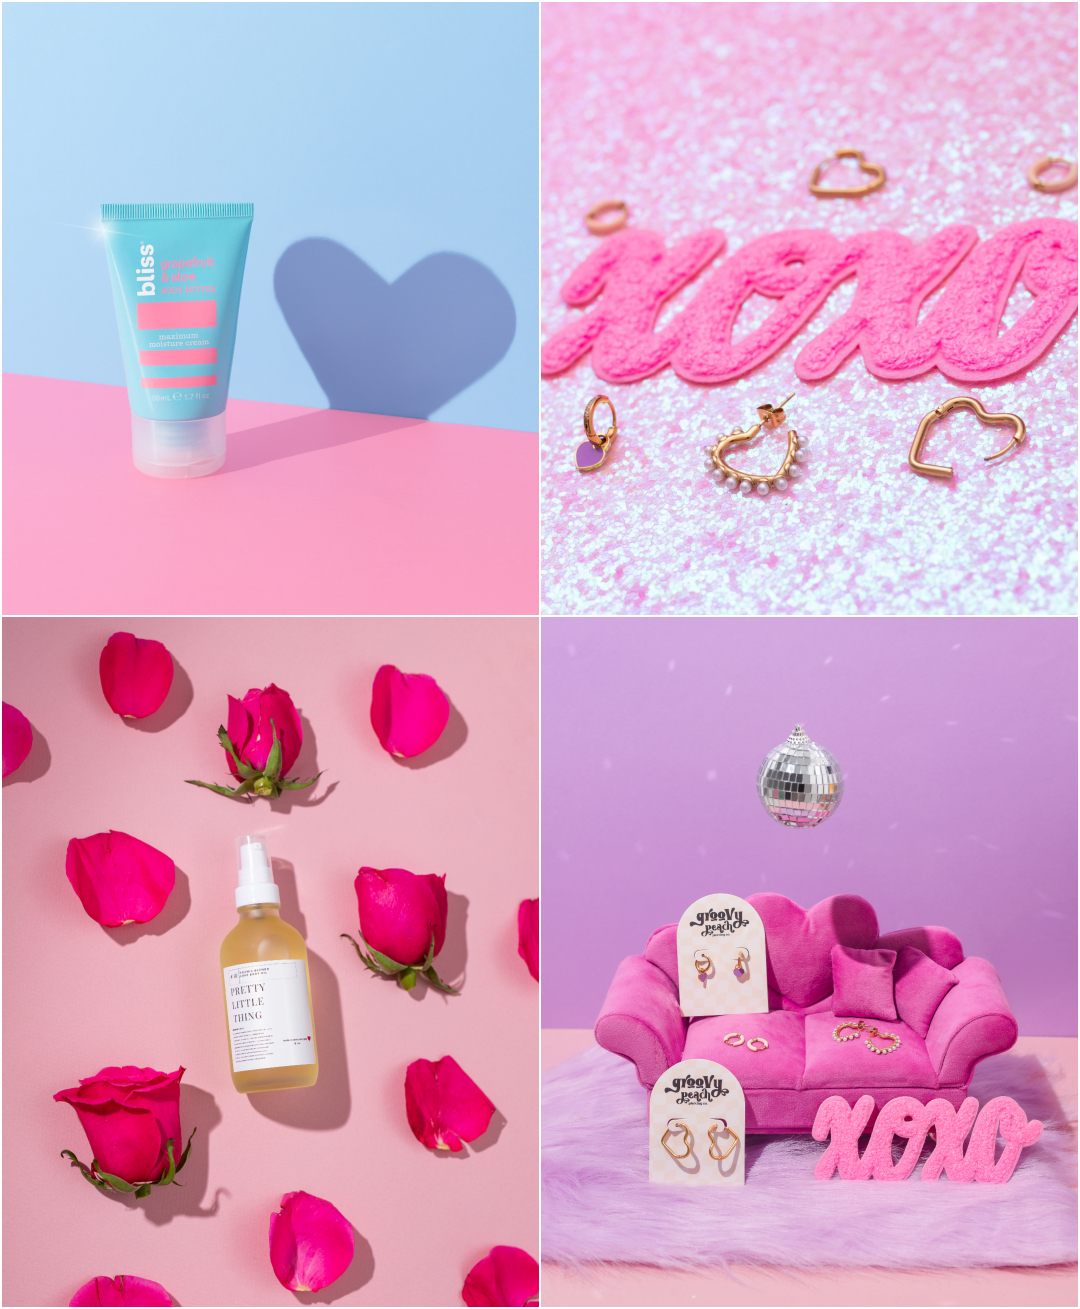 Creative Holiday Product Photography - Valentines Day Themed Product Photos